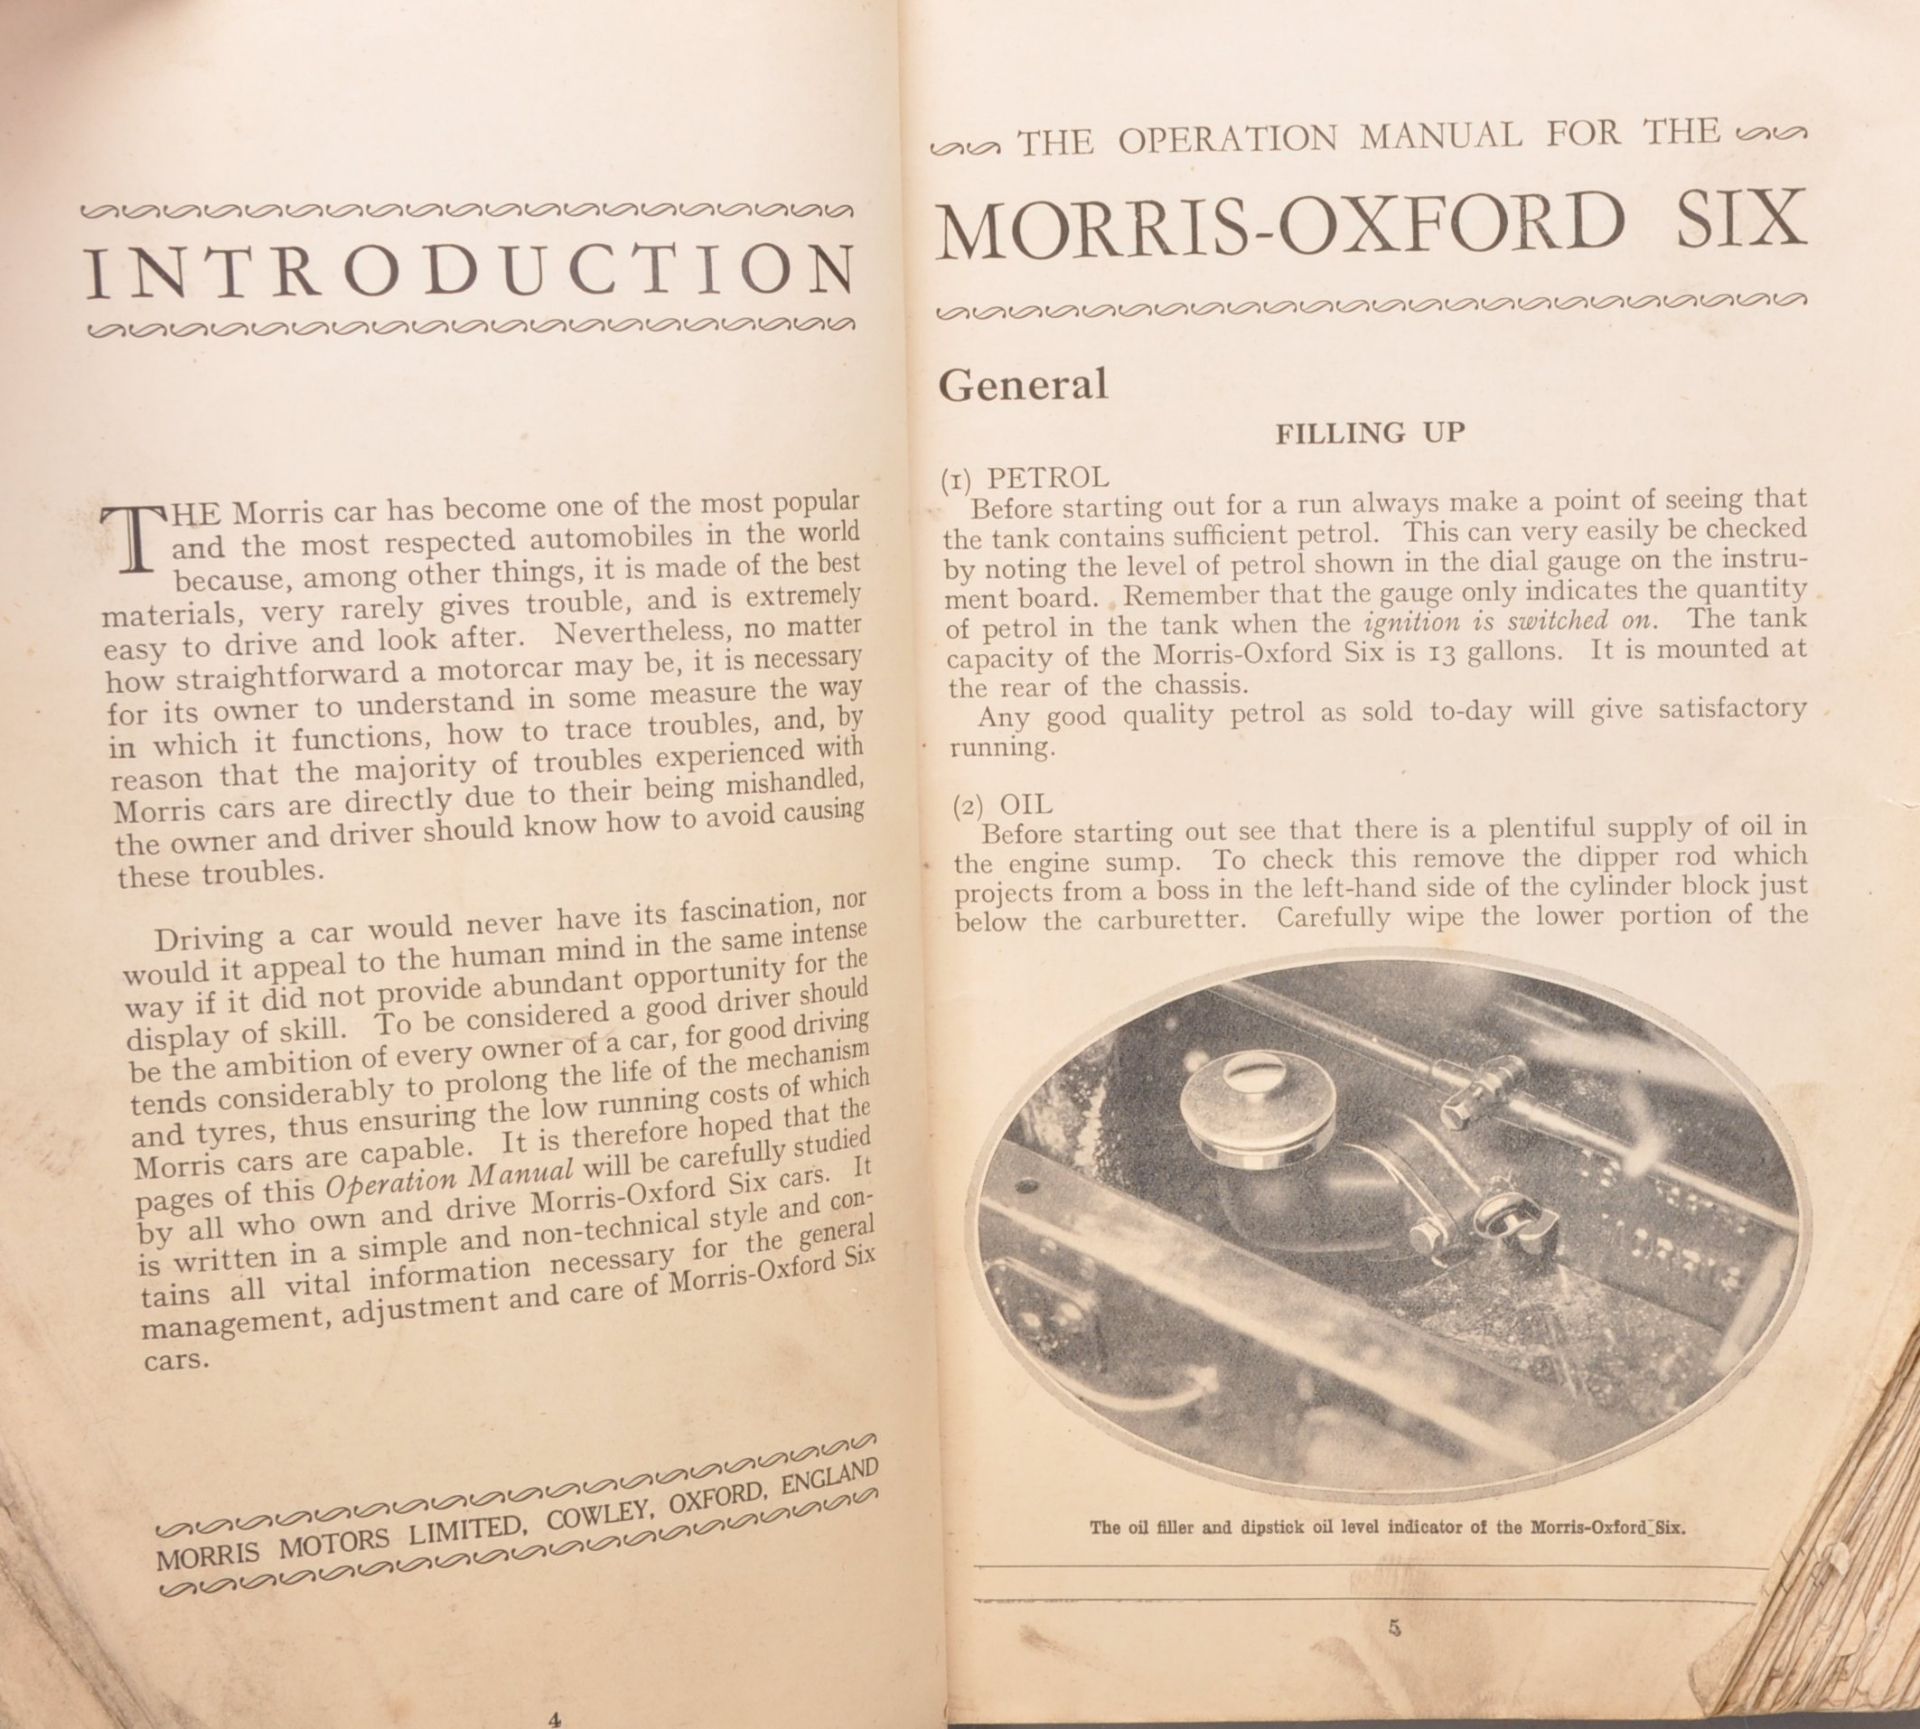 Motoring - A Operation Manual for a Morris-Oxford Six. 1933 edition. - Image 4 of 4